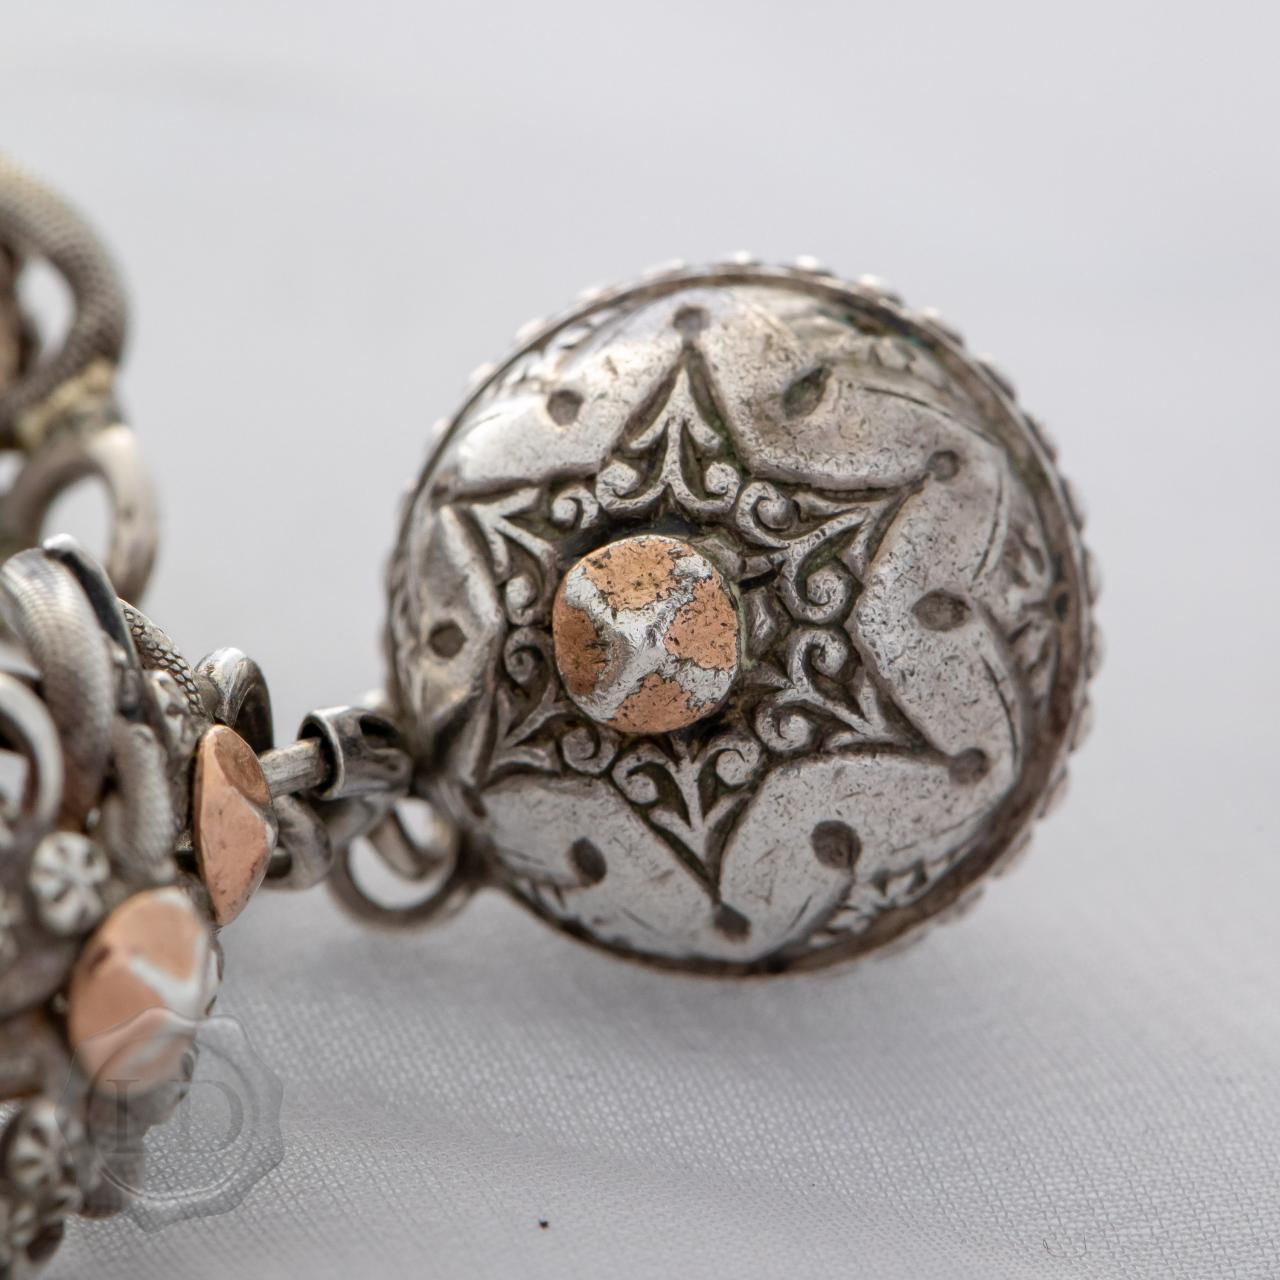 French ornate bracelet with orb pendant charm circa 1900